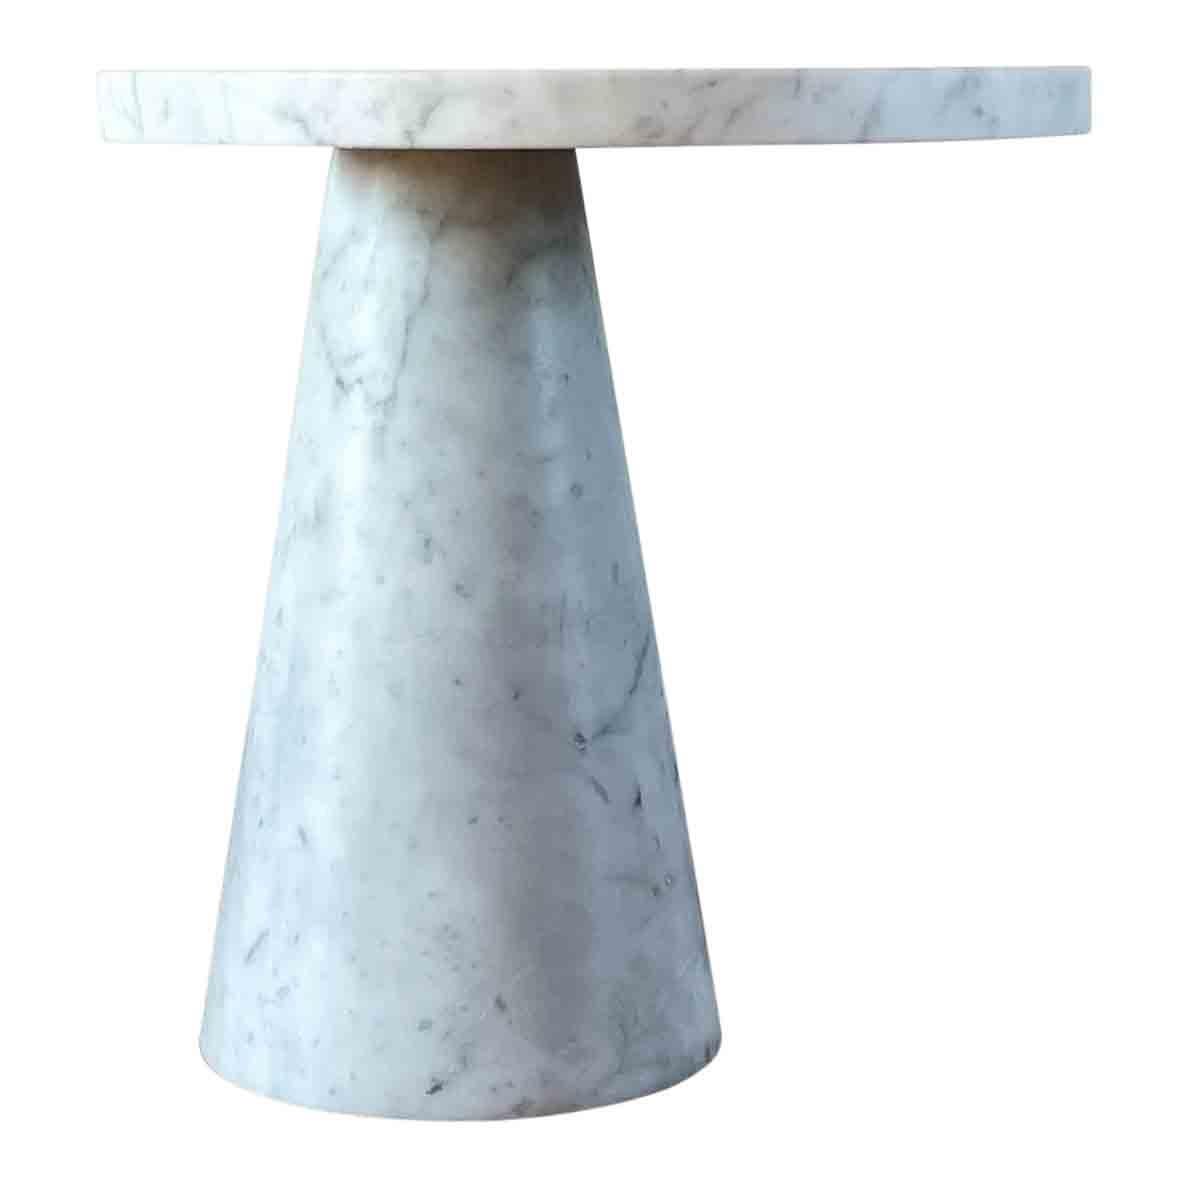 Angelo Mangiarotti Carrara Marble “Eros” Side Table for Skipper, 1971, Set of 2 For Sale 3